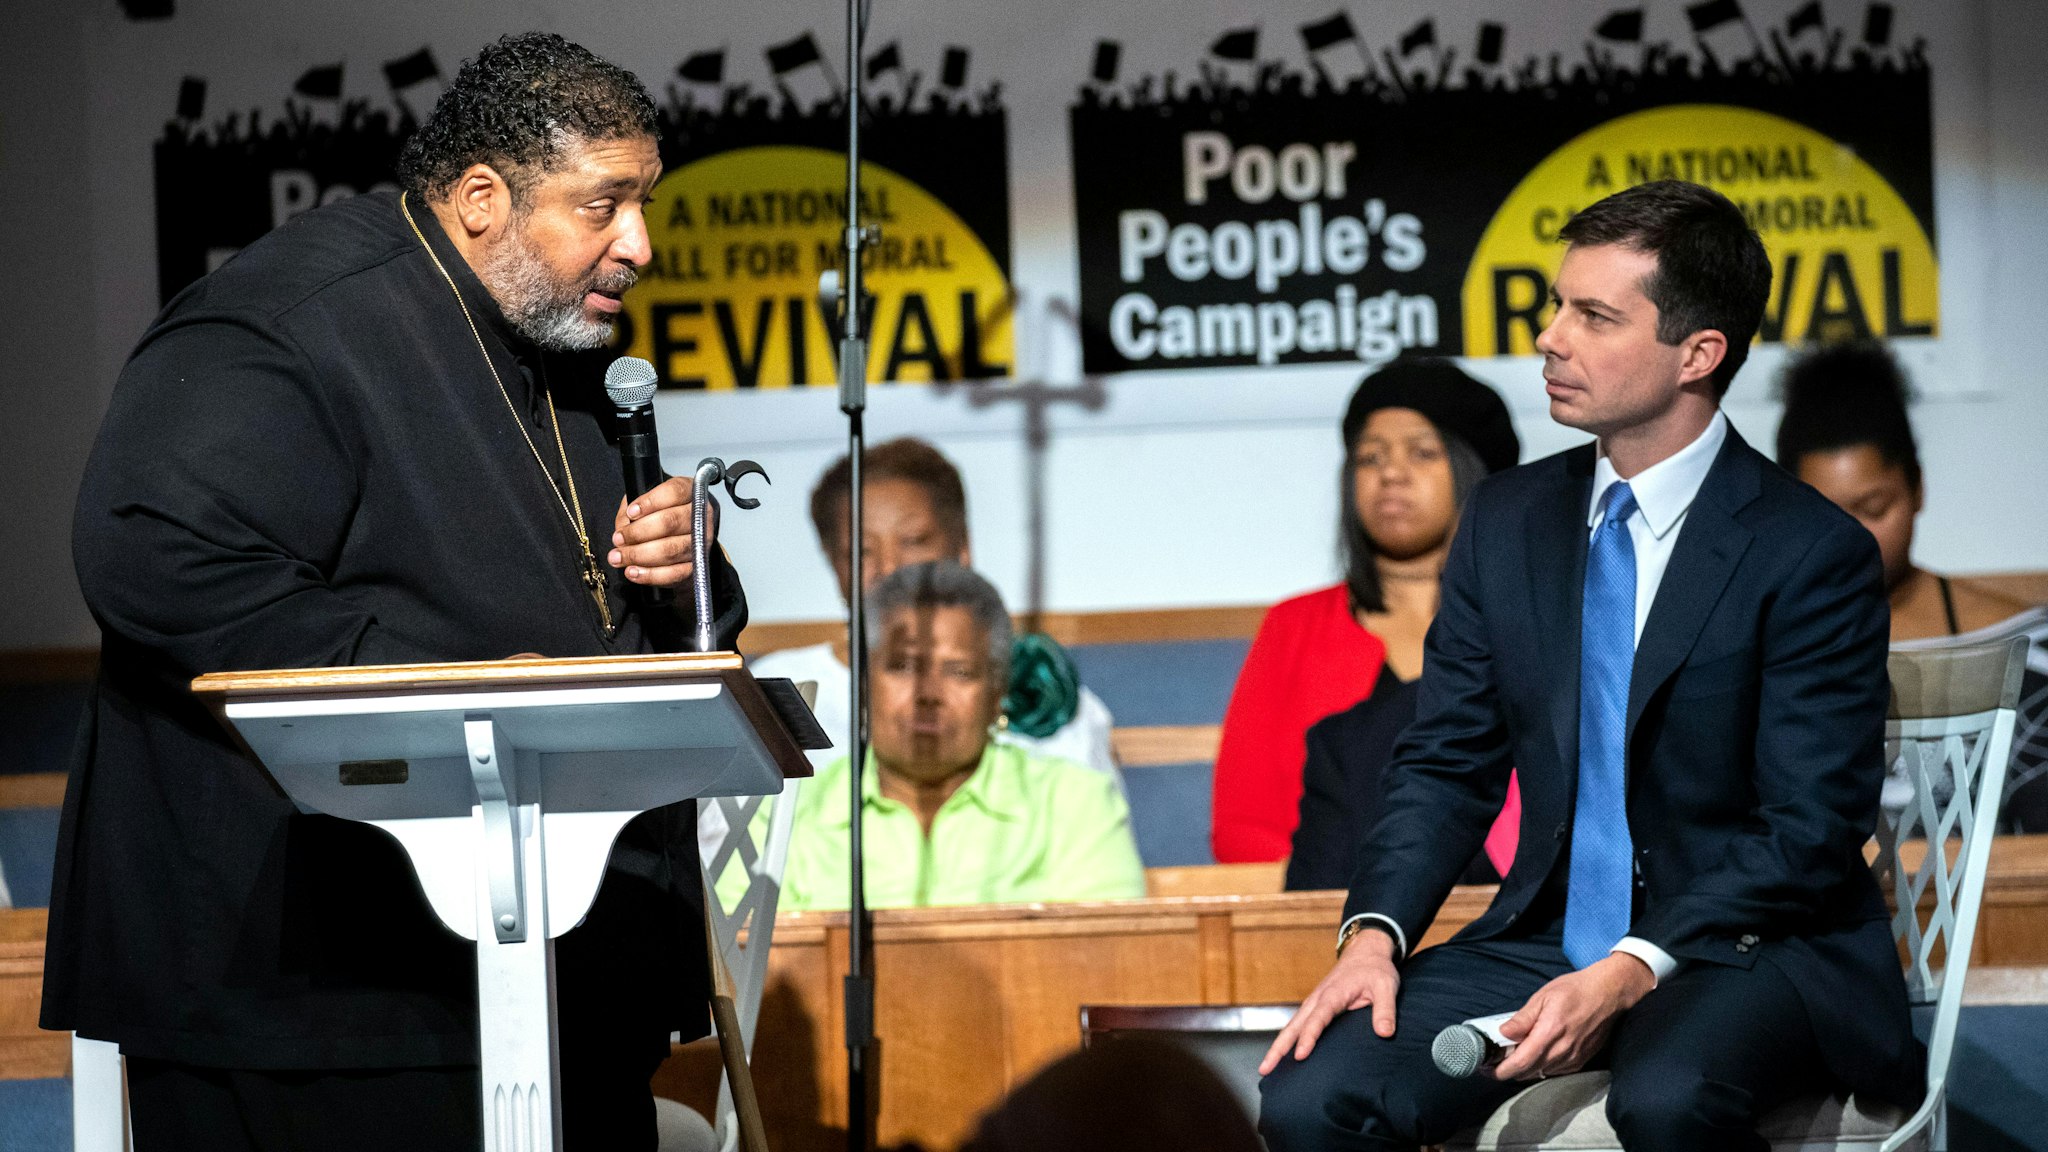 Reverend William Barber introduces South Bend, Indiana mayor and Democratic presidential candidate, Pete Buttigieg, during Sunday morning service at Greenleaf Christian Church in Goldsboro, North Carolina on December 1, 2019.